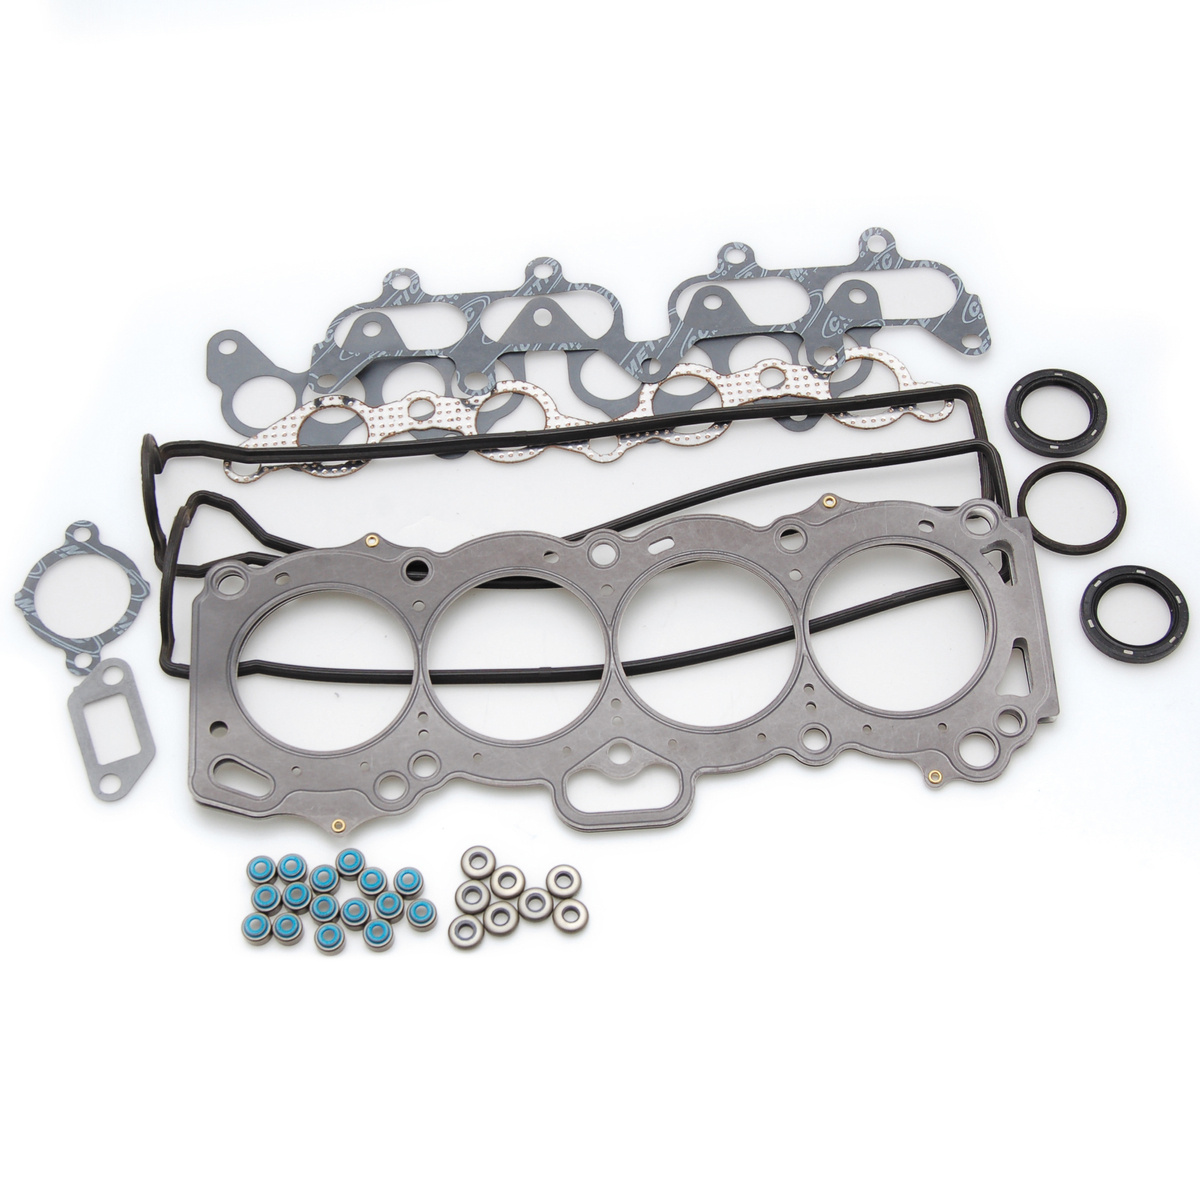 Cylinder Head Gasket Toyota 4A-GE Top End Gasket Kit, 83mm Bore, .056" MLS , 16-Valve Cometic PRO2041T-830-056